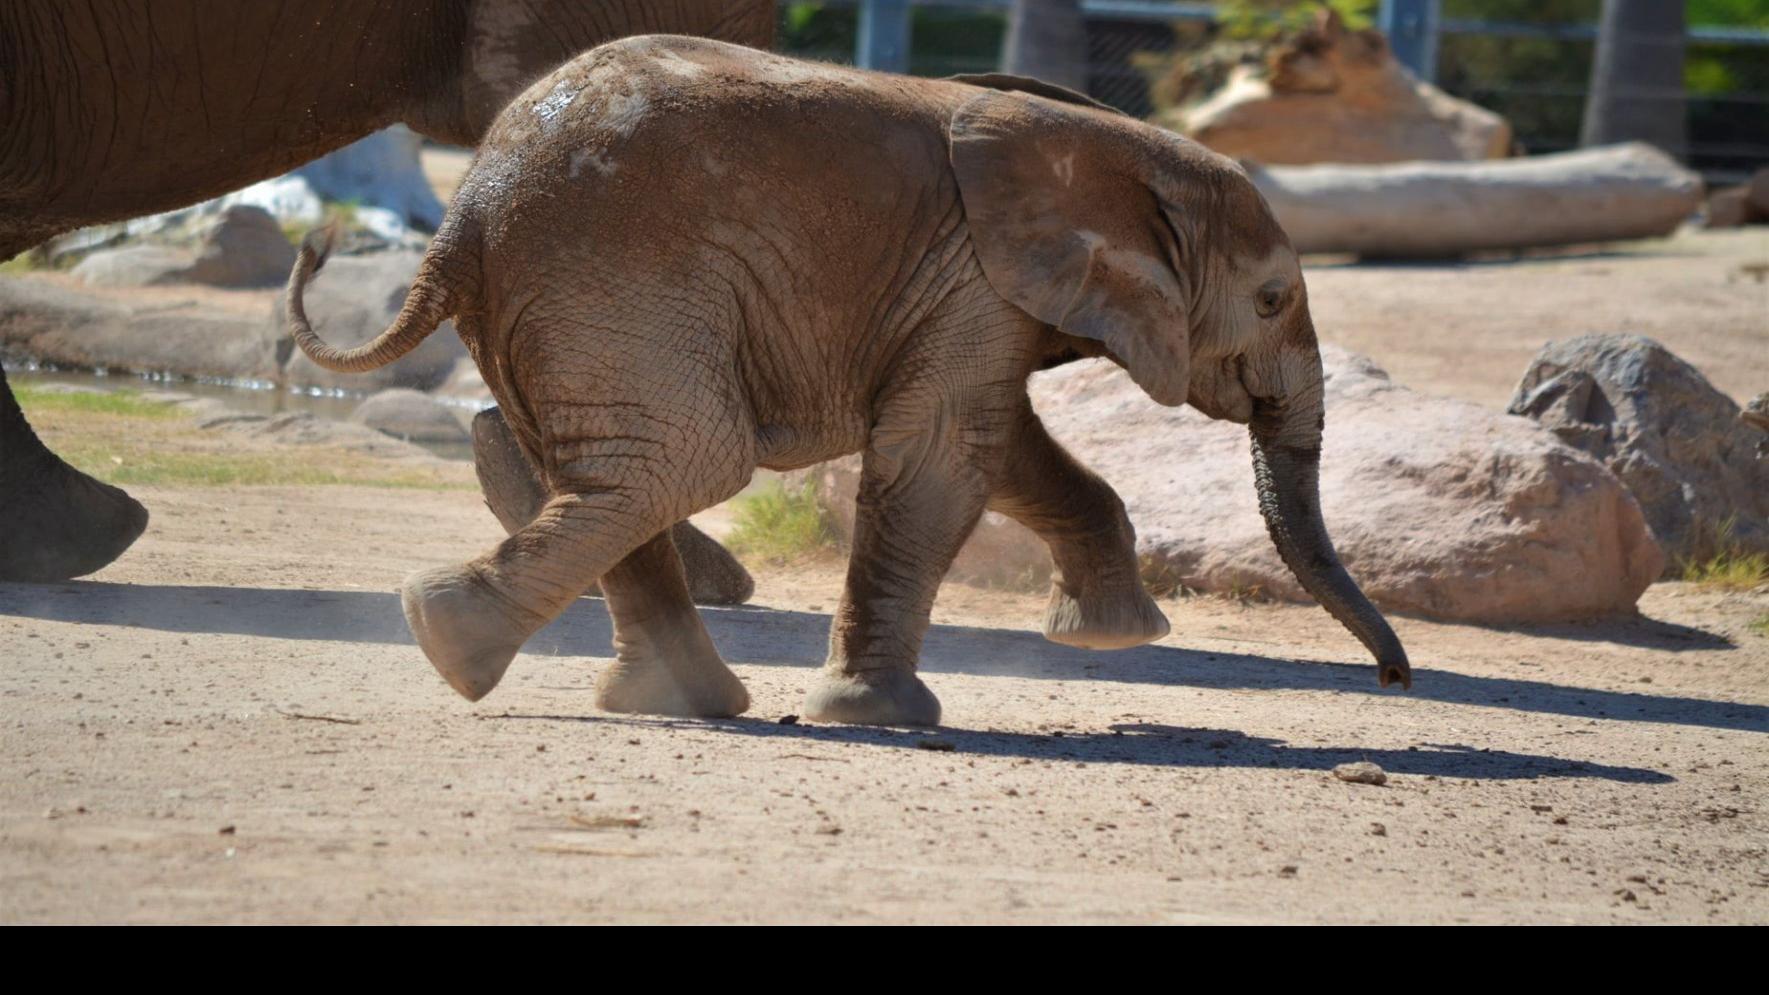 Tucson S Baby Elephant Loves Food And Is Still As Close As Ever With Nandi Caliente Tucson Com